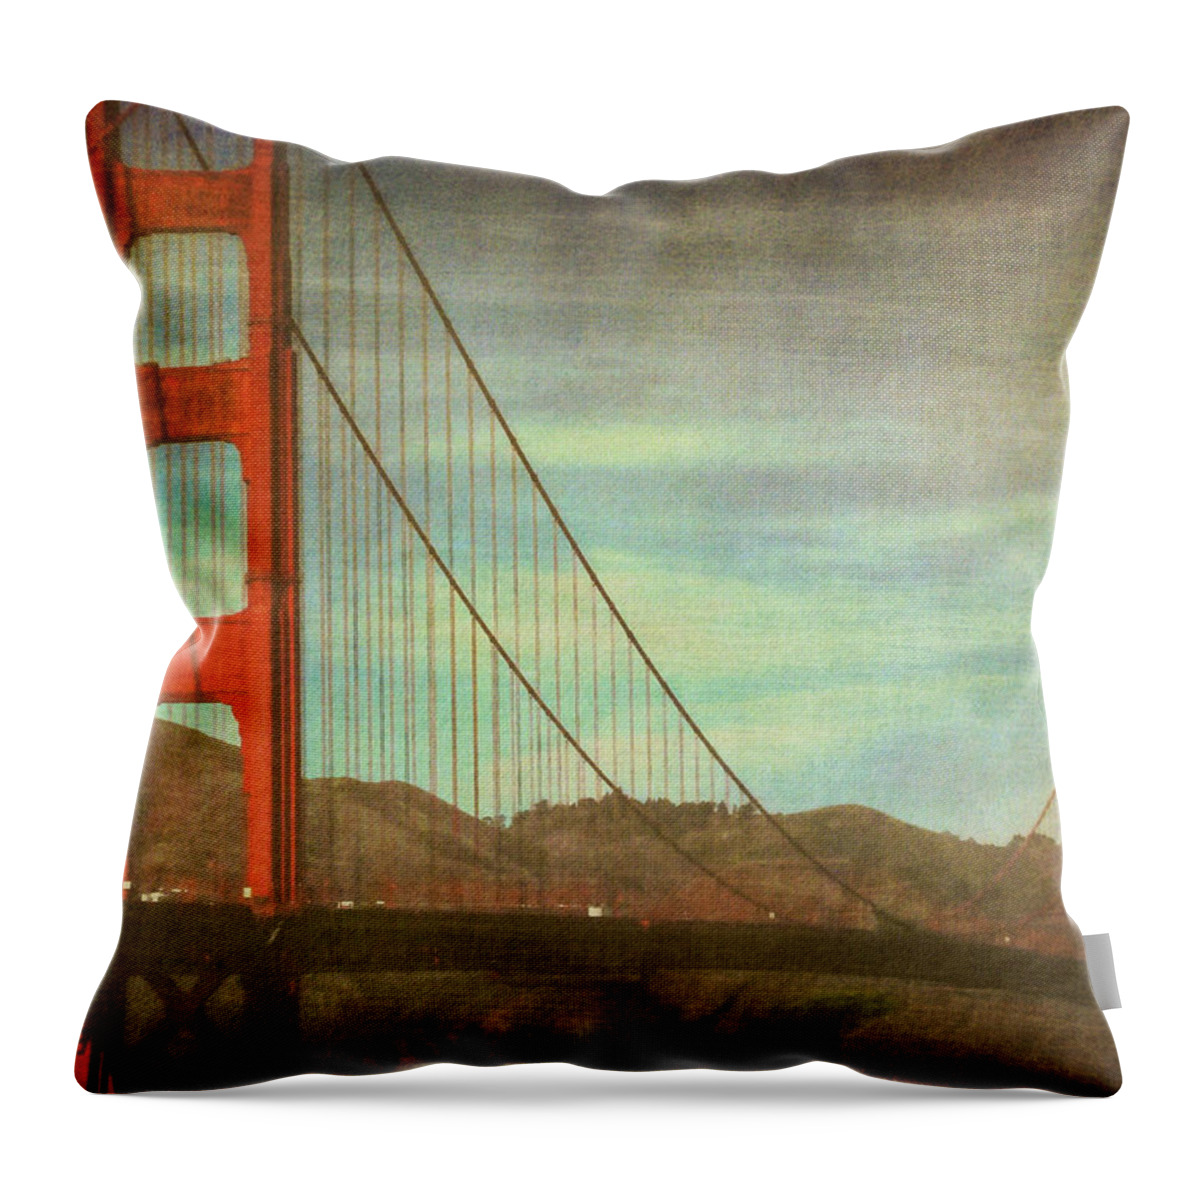 San Francisco Throw Pillow featuring the photograph The Iron Horse by Kandy Hurley